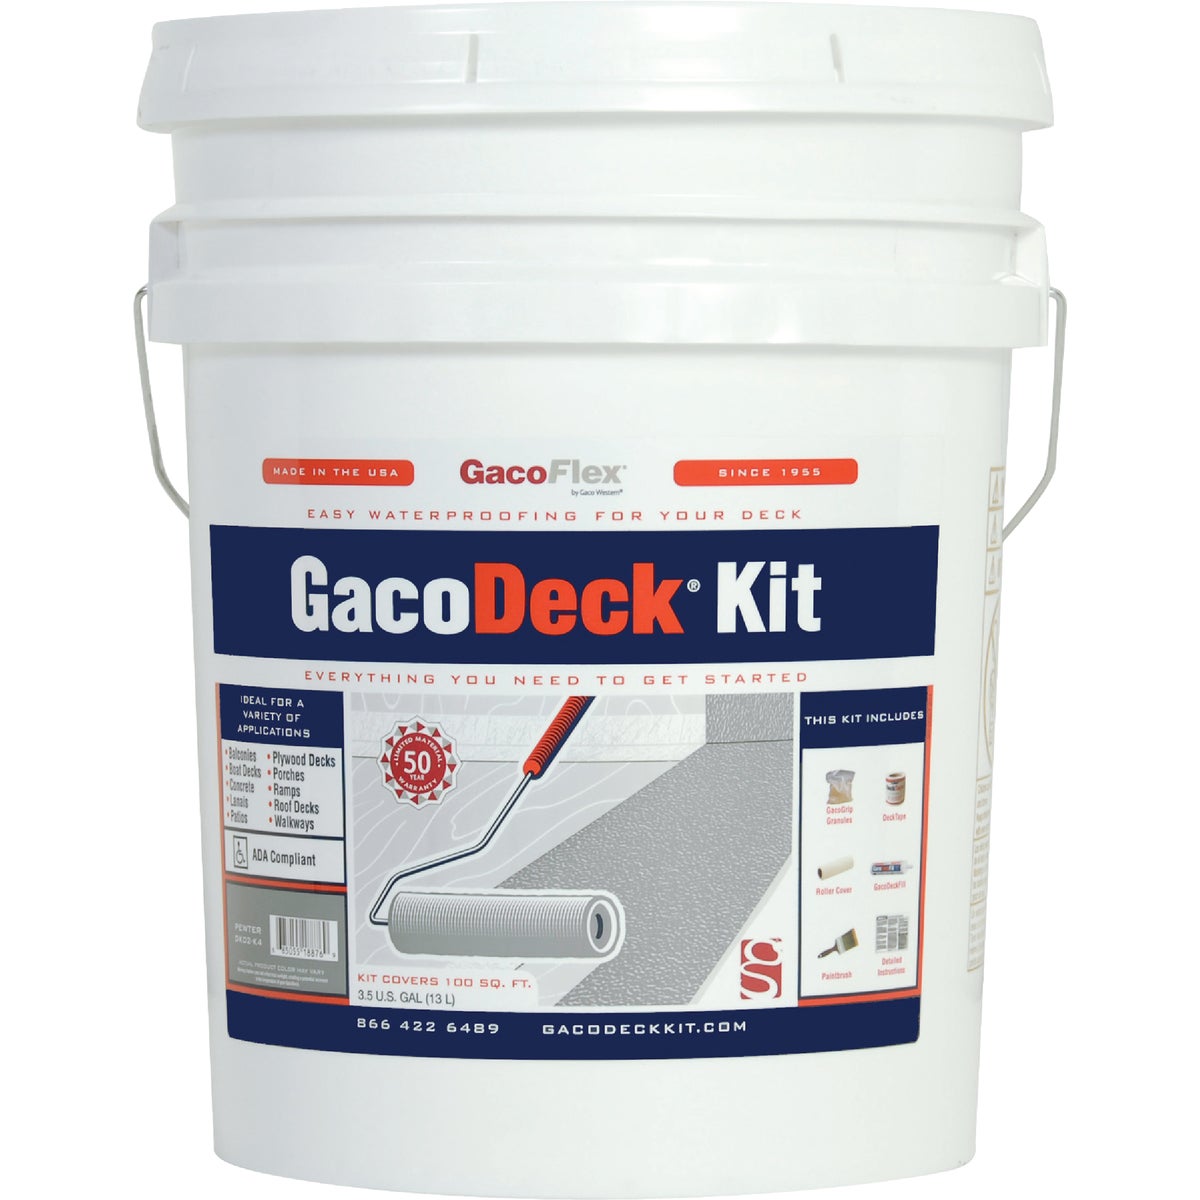 Item 772026, GacoDeck is a water-borne, single component waterproof deck system that can